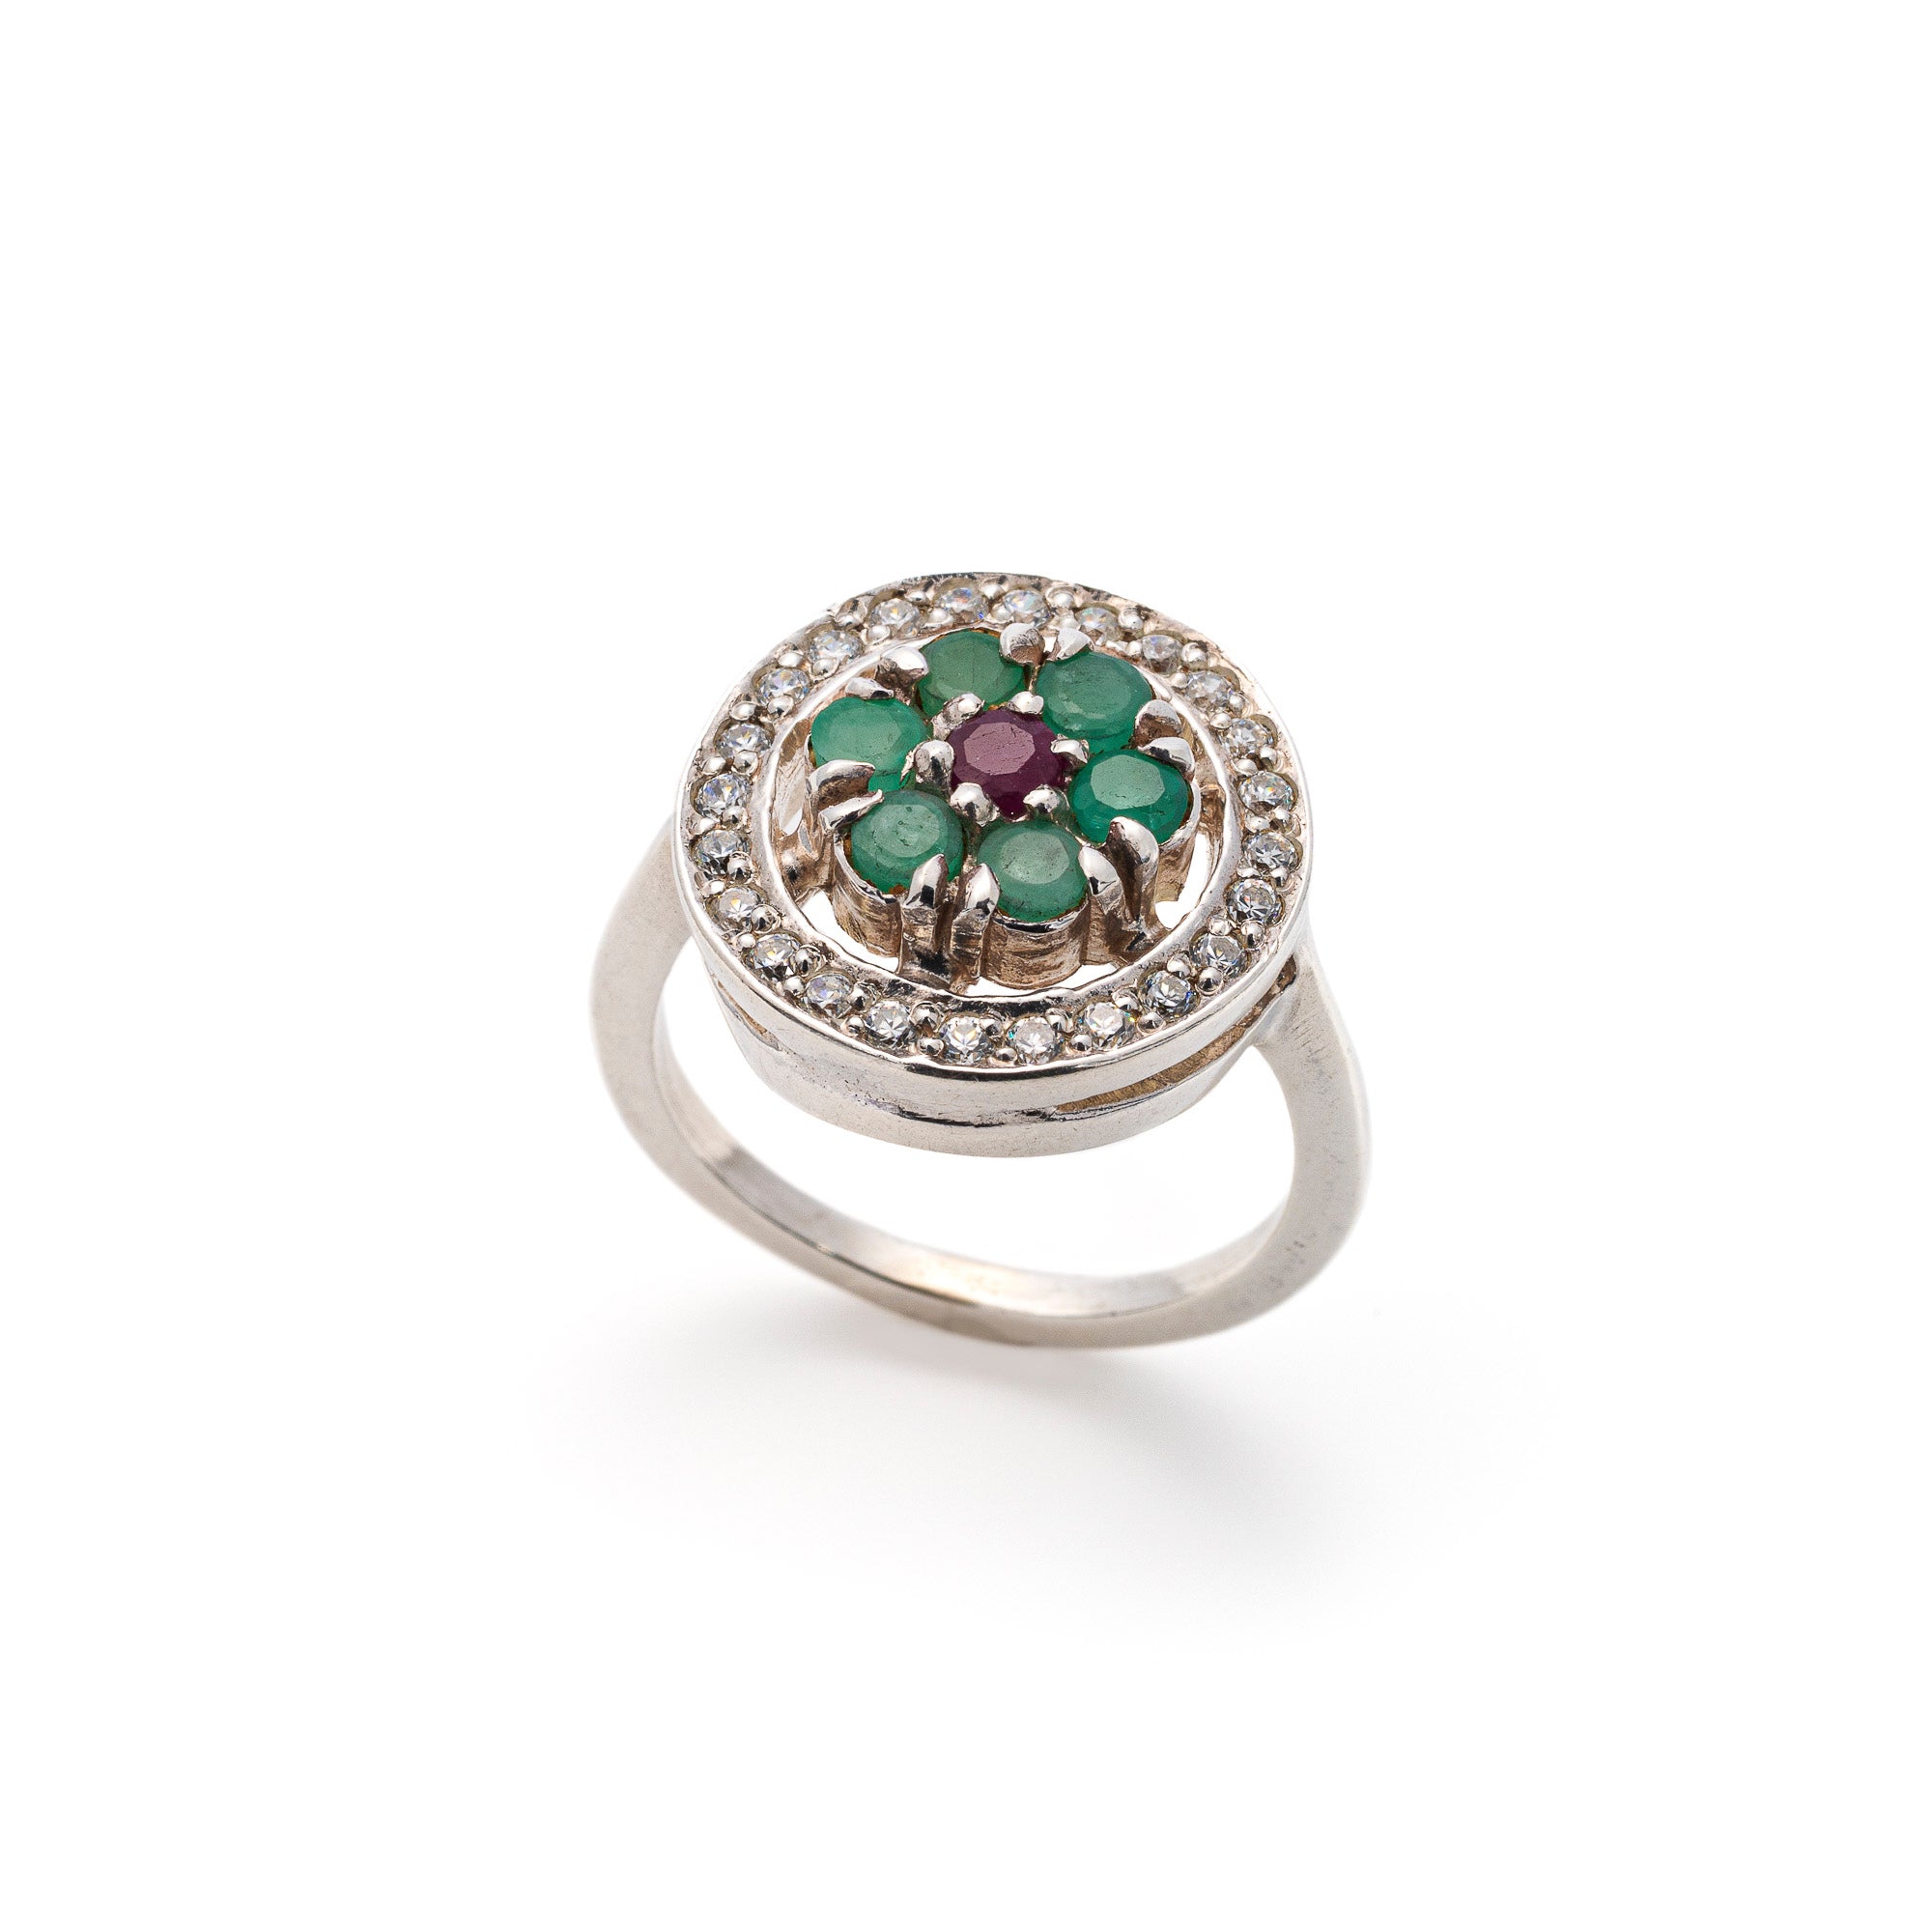 Emerald Flower Ring, Real Emerald Ring, Silver Green Flower Ring